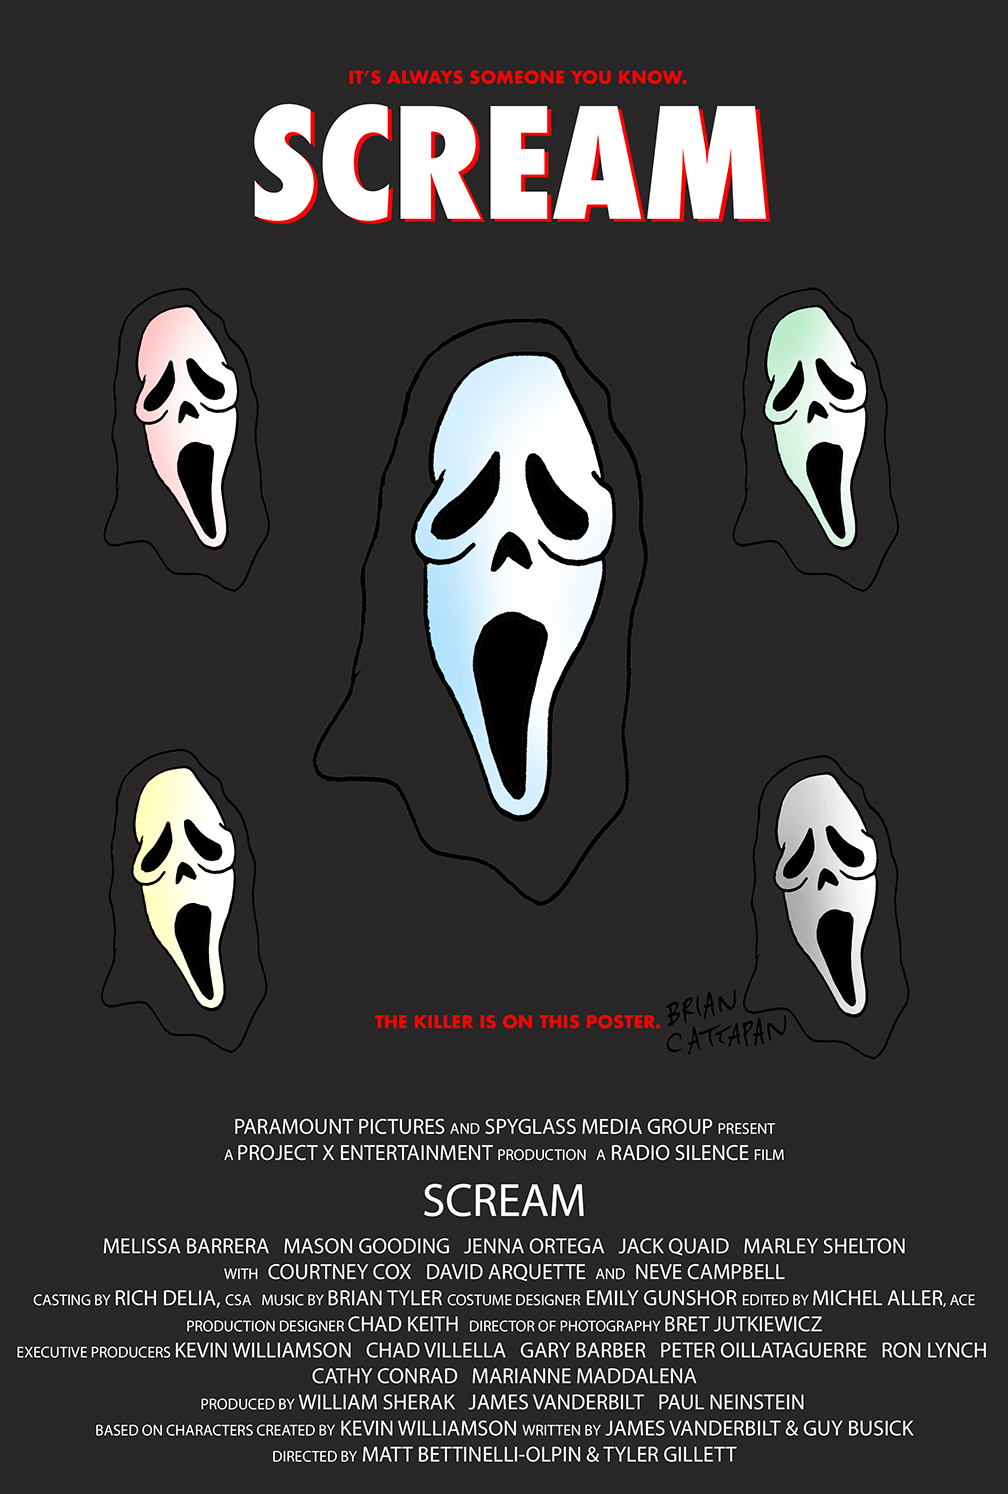 Brian Cattapan on X: I was entertained by SCREAM(5) & inspired to create a  tribute #movie poster.🙂#Scream #ScreamMovie #Scream2022 #Scream5 #Horror  #Comedy #Mystery #movieposter #artist #illustrator #independent  #HelloSidney #productionart #art